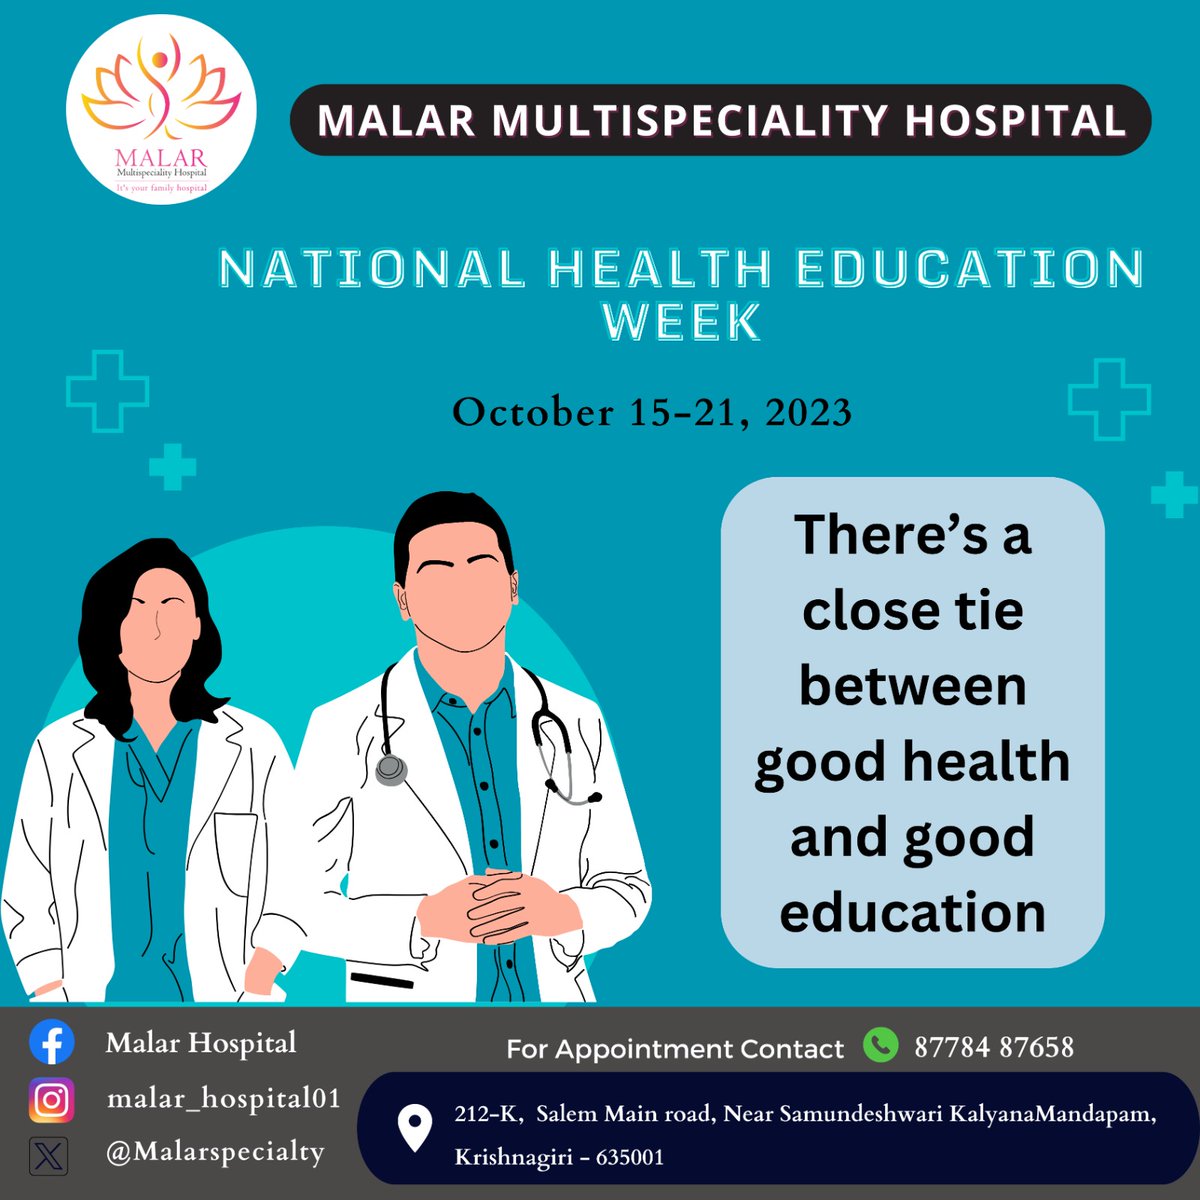 #healtheducation #mentalhealtheducation #oralhealtheducation #publichealtheducation #communityhealtheducation #sexualhealtheducation #holistichealtheducation #globalhealtheducation #healtheducationandpromotion #healtheducationworks #menstrualhealtheducation #sexhealtheducation